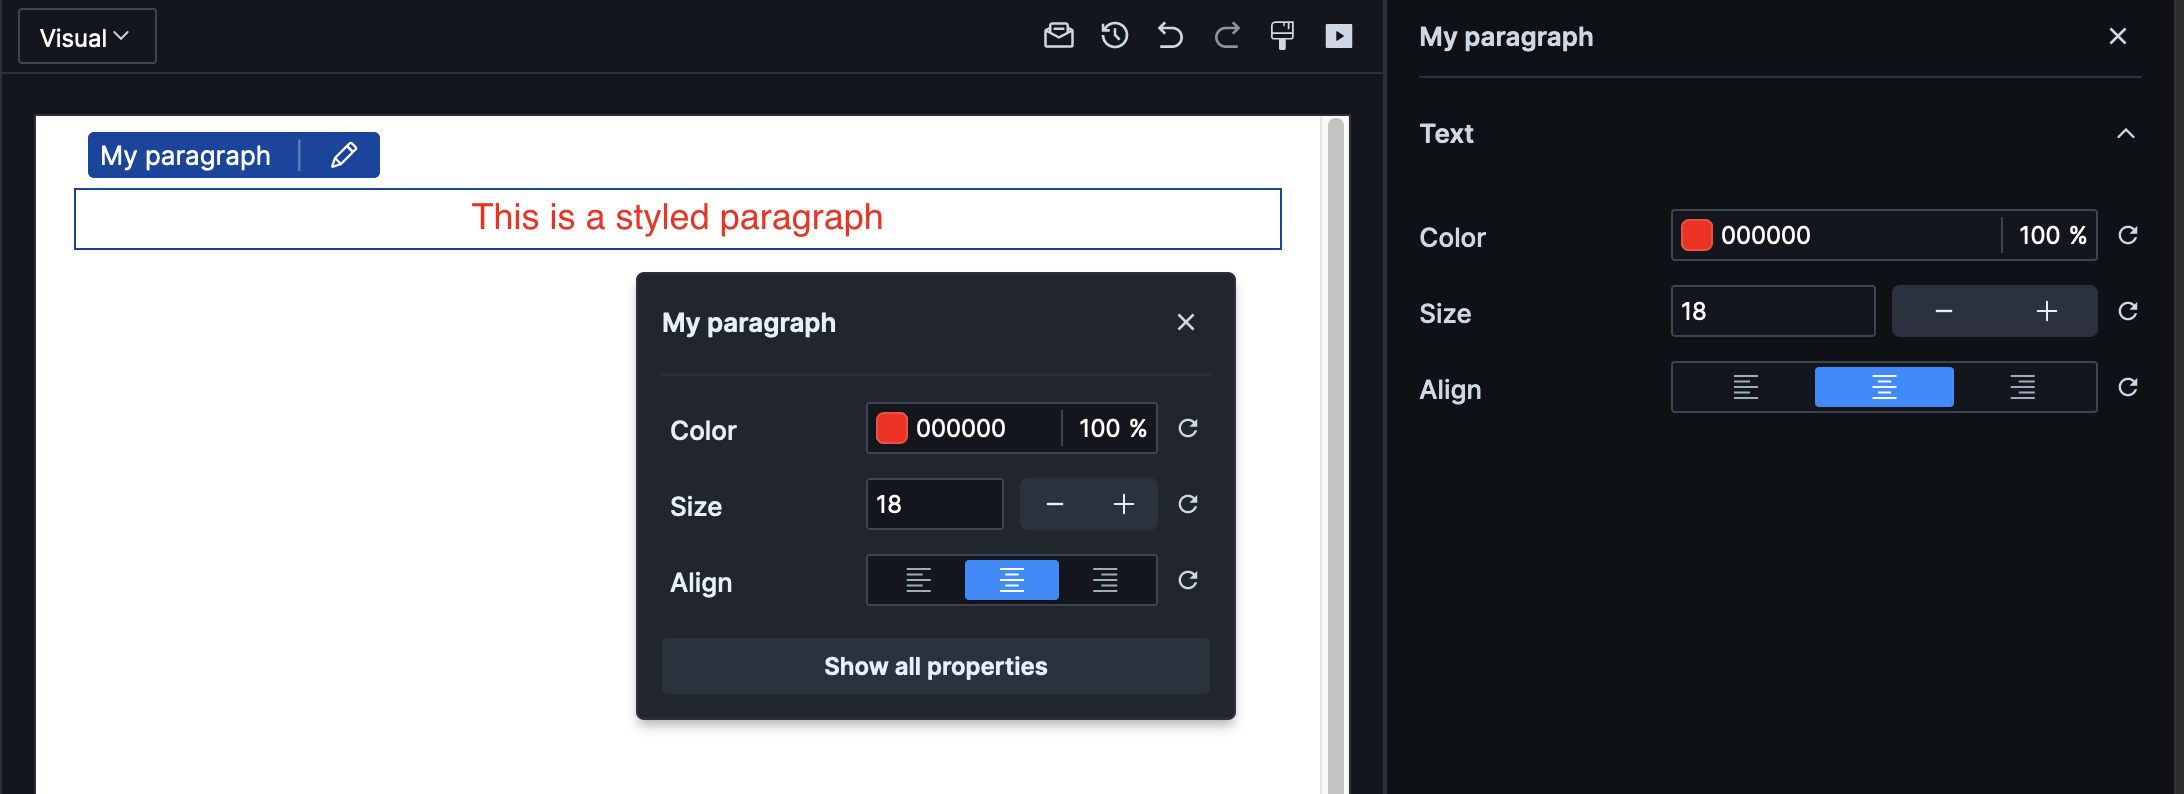 In the visual editor, the pencil icon beside the component "my paragraph" has been clicked. A pop-up menu appears over the canvas with a list of three properties: color, size and align. The user has clicked "Show all properties" which reveals a right-hand panel of all properties grouped under "Text".